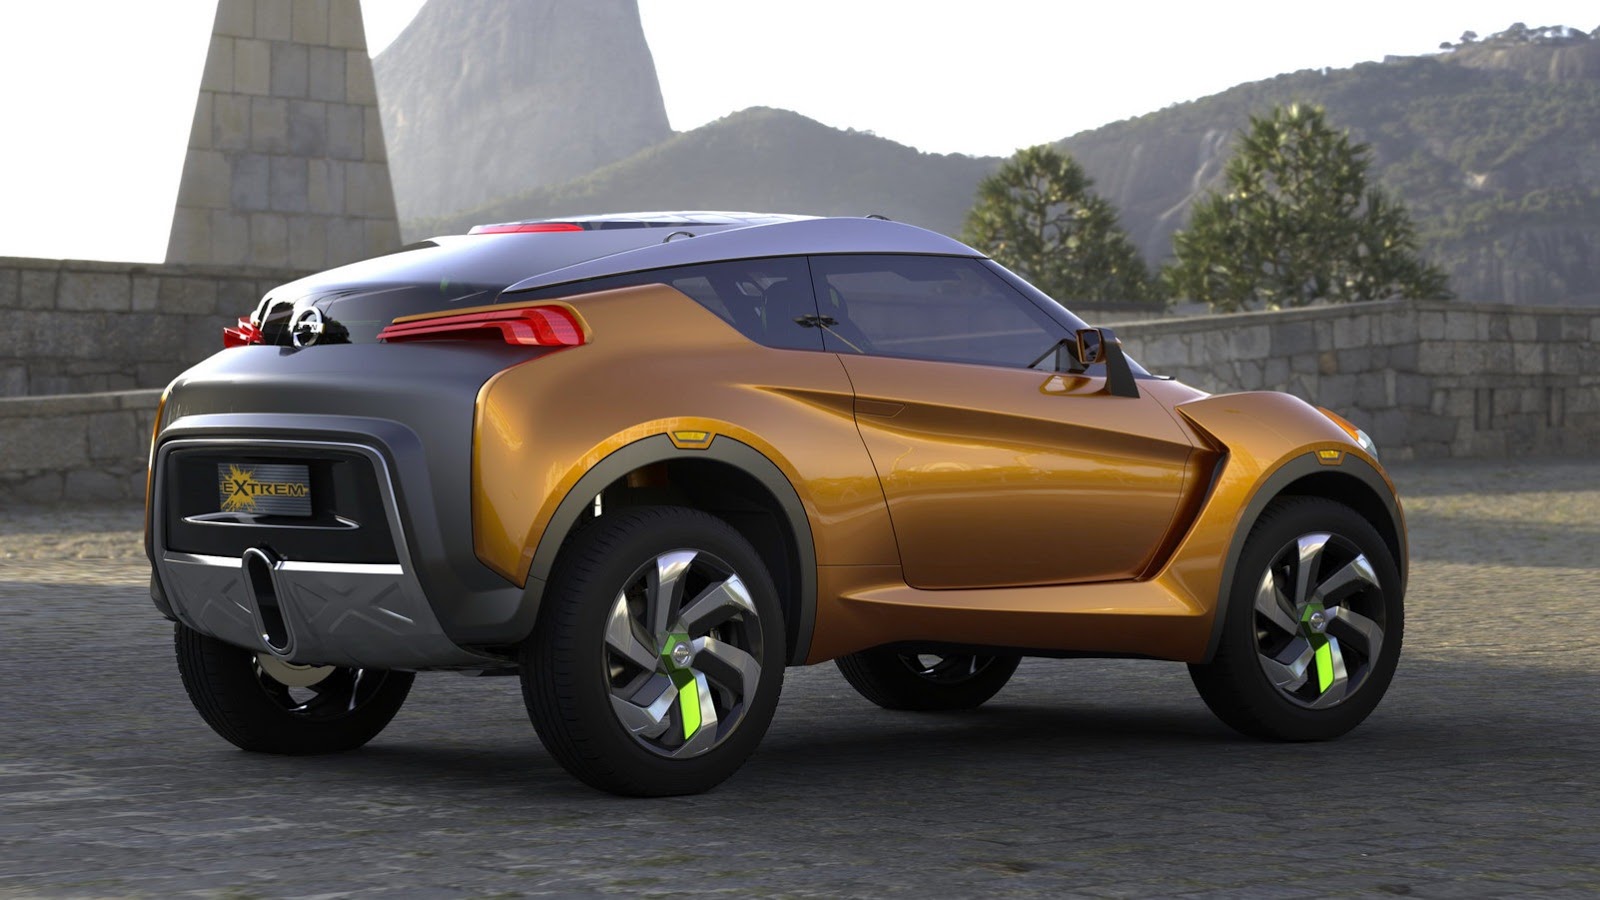 Nissan Extrem concept previews dramatic compact crossover - Photos (1